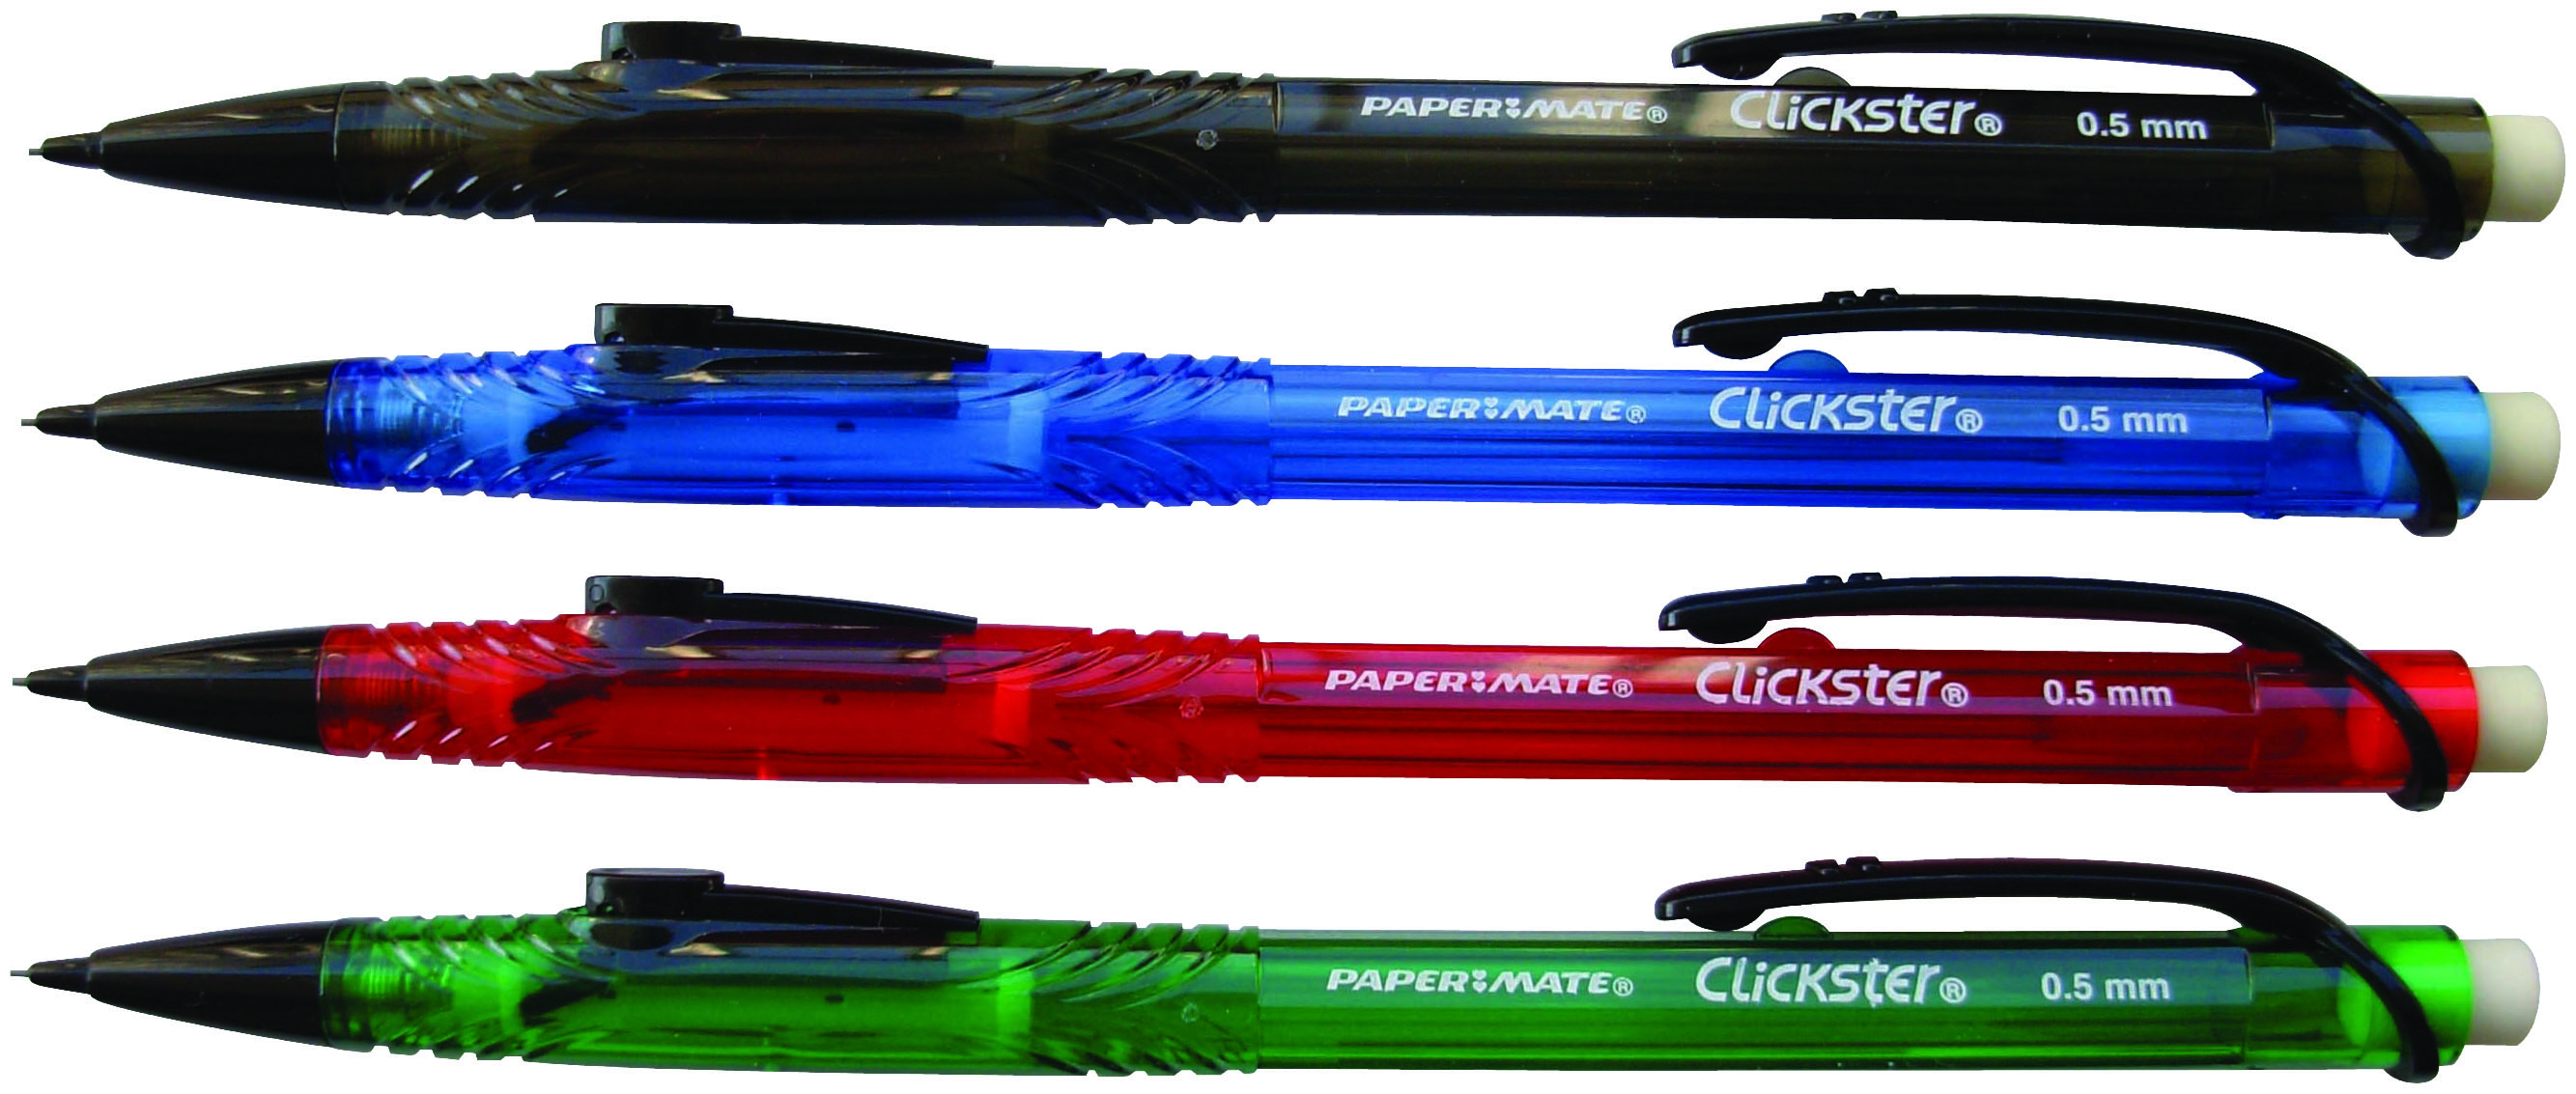 Papermate Clickster 0.7mm Mechanical pencil